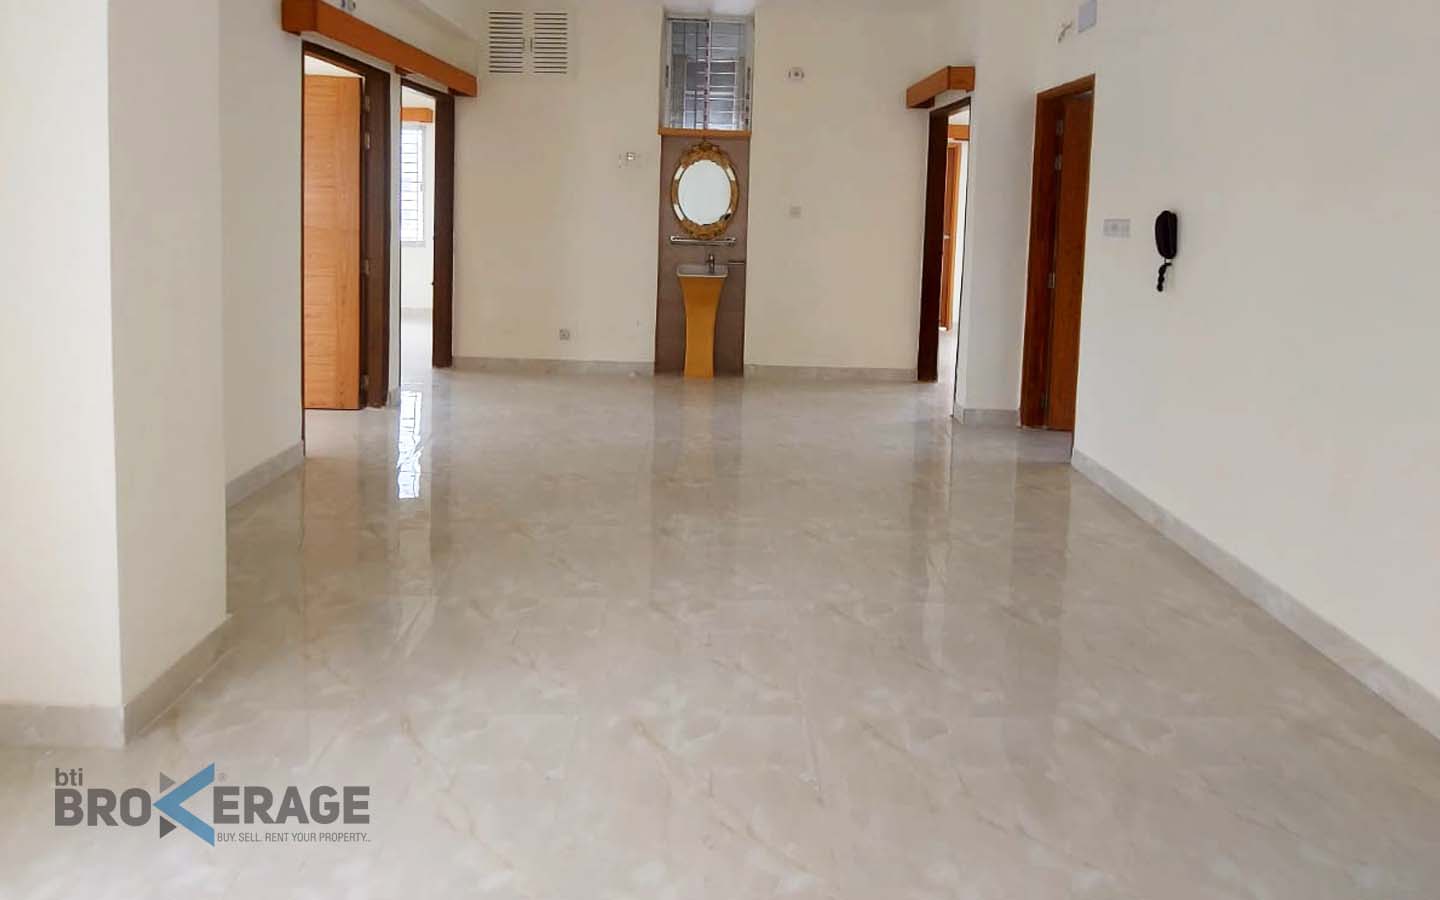 Ready flat for sale in dhaka